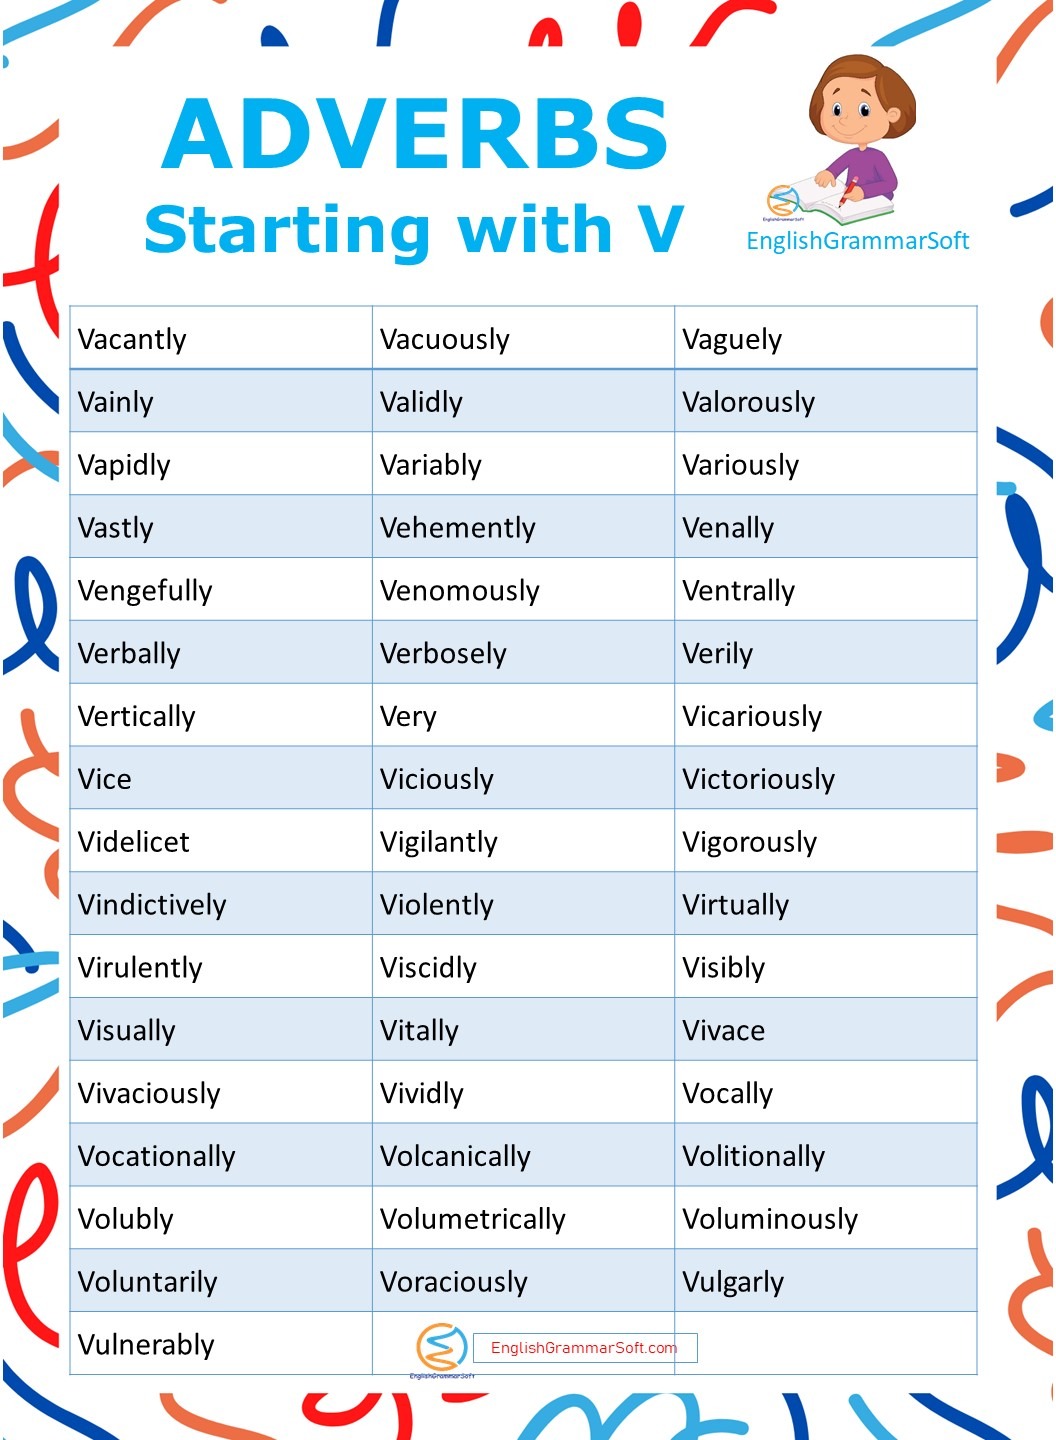 adverbs starting with V